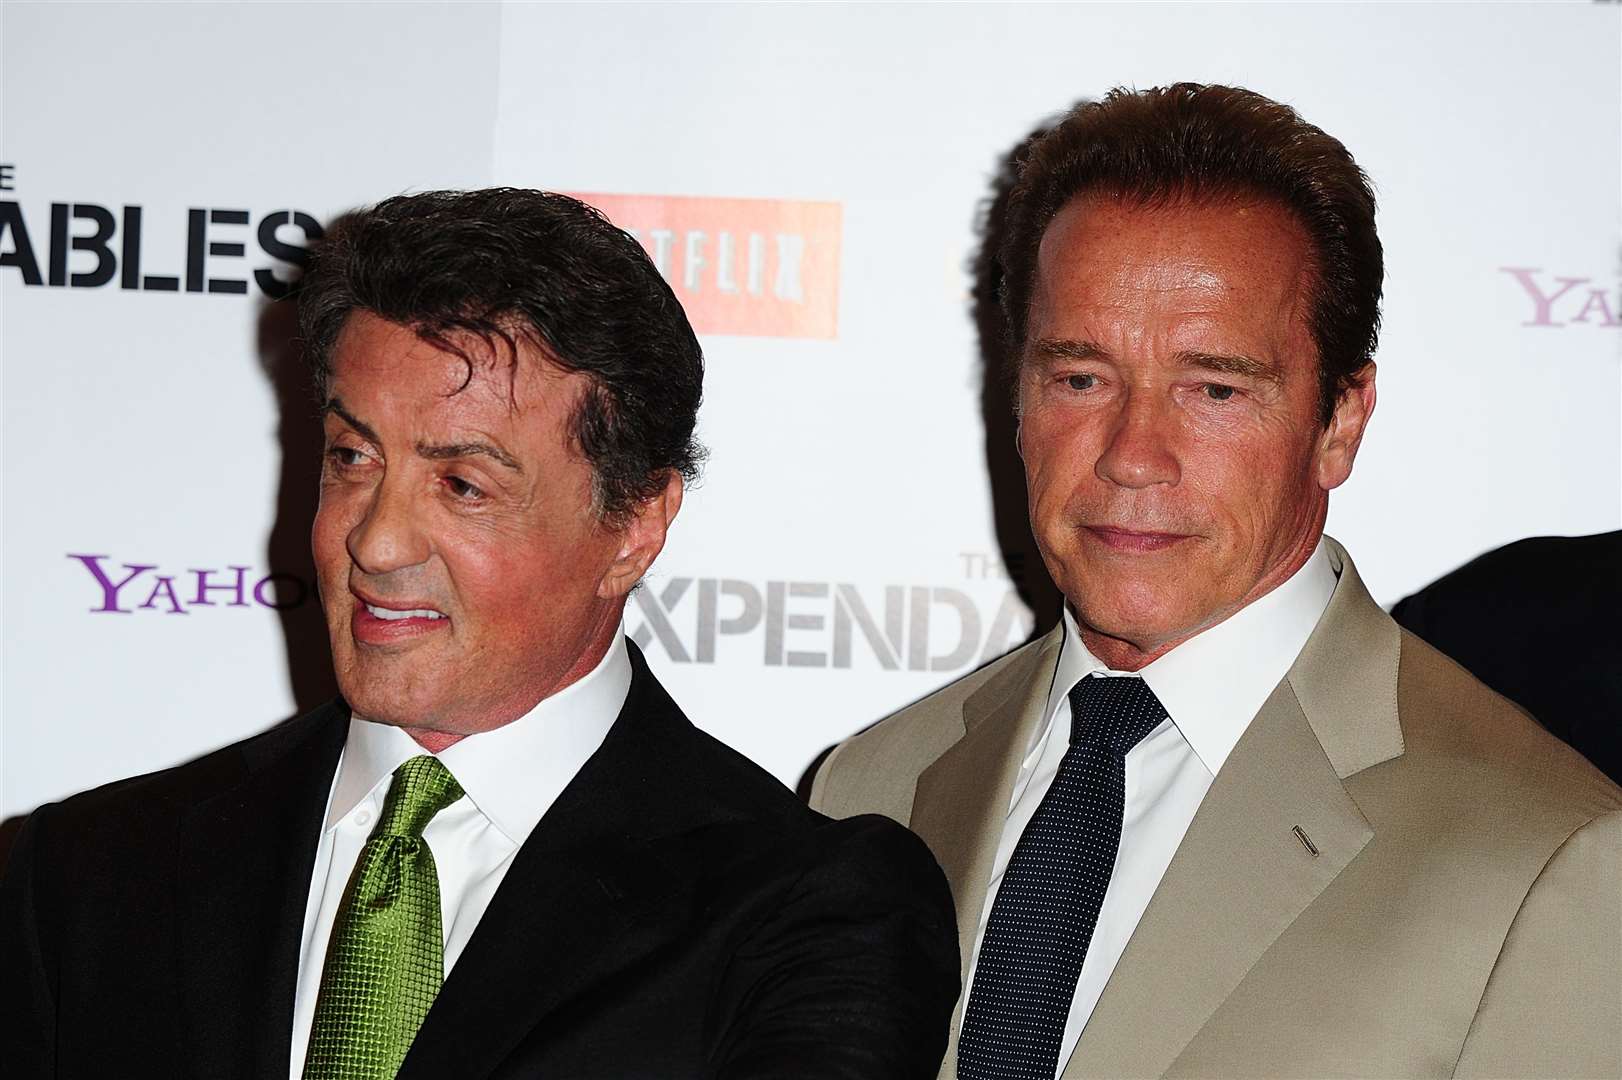 Sylvester Stallone and Arnold Schwarzenegger both paid tribute to Carl Weathers